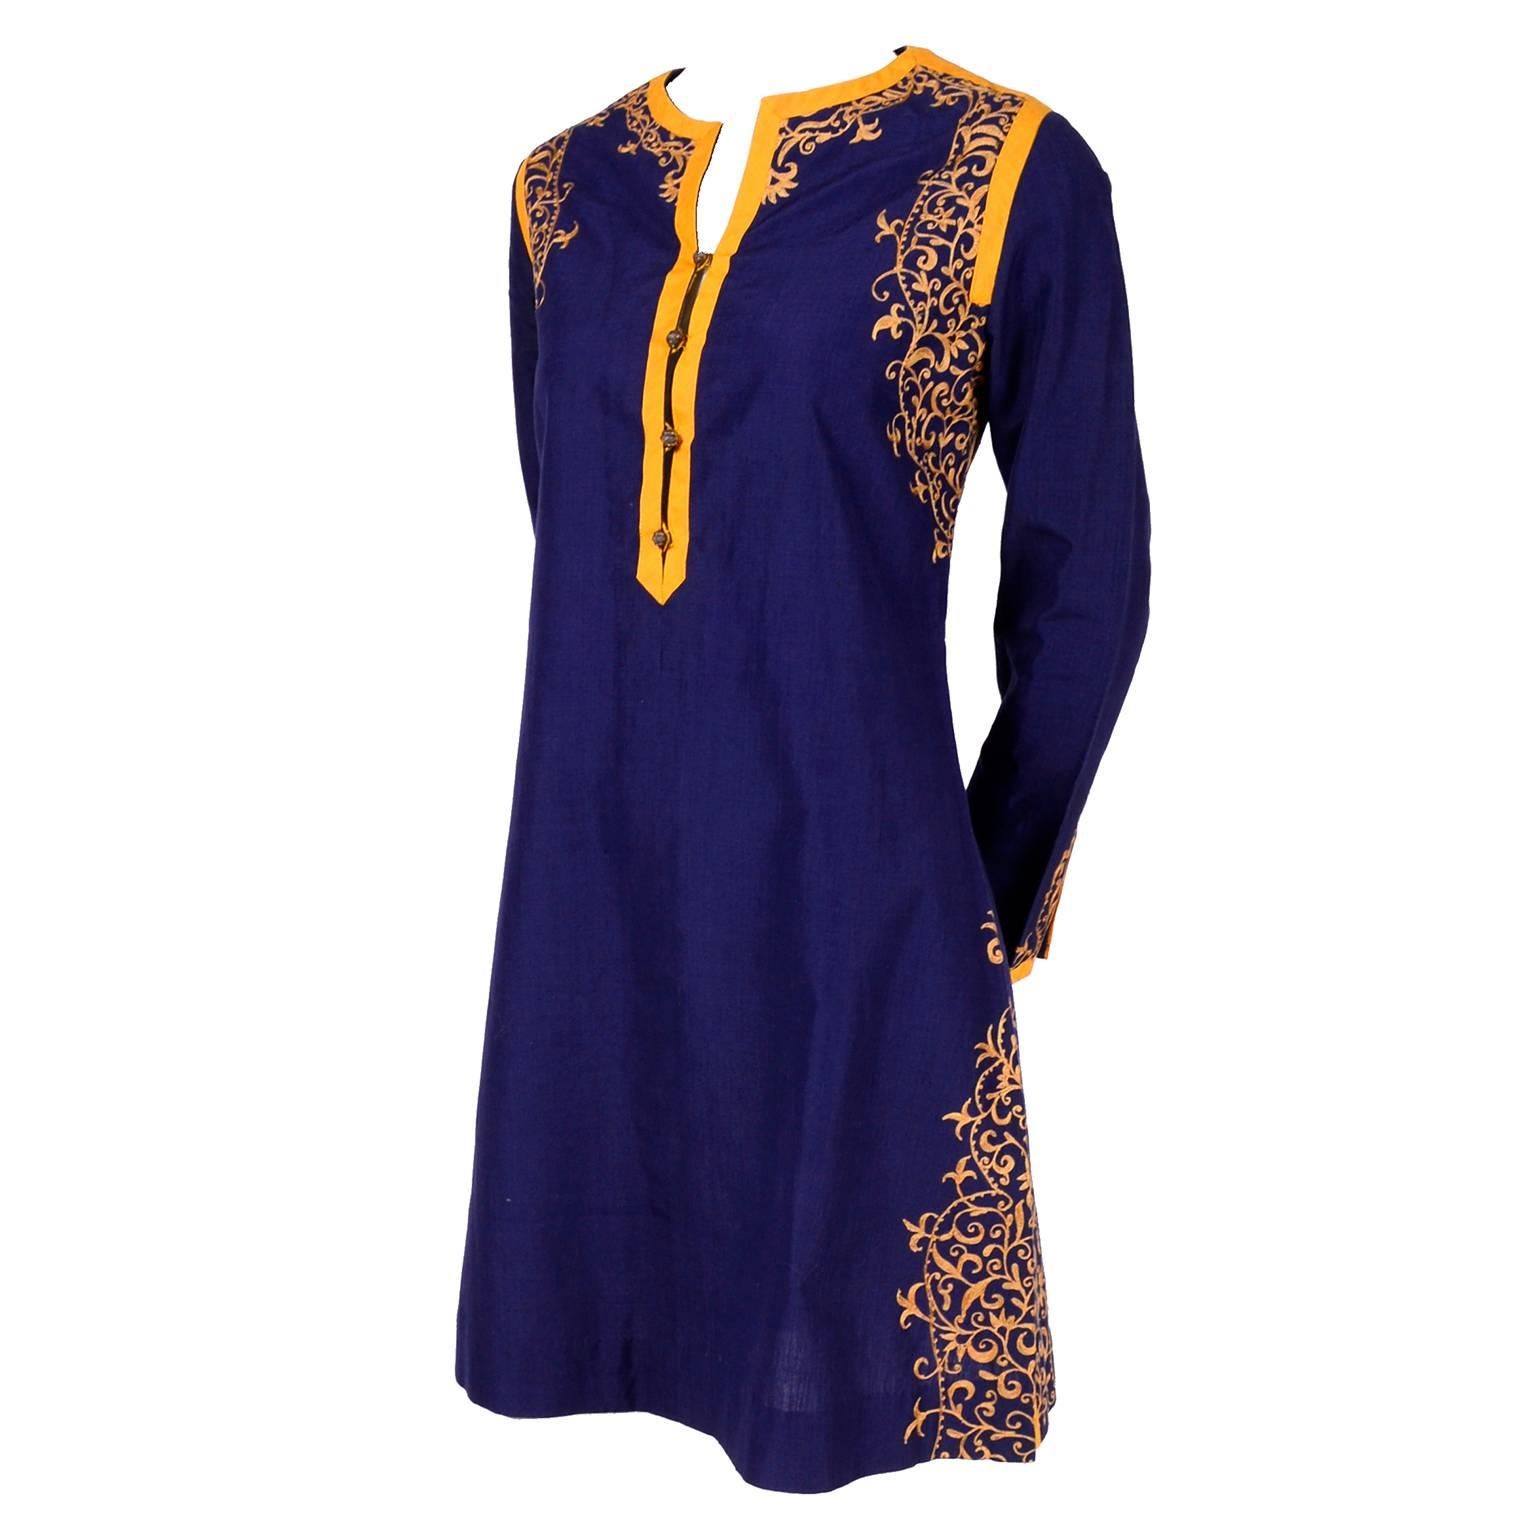 Aananda Vintage Navy Blue Cotton Dress Tunic with Marigold Embroidery, 1960s 